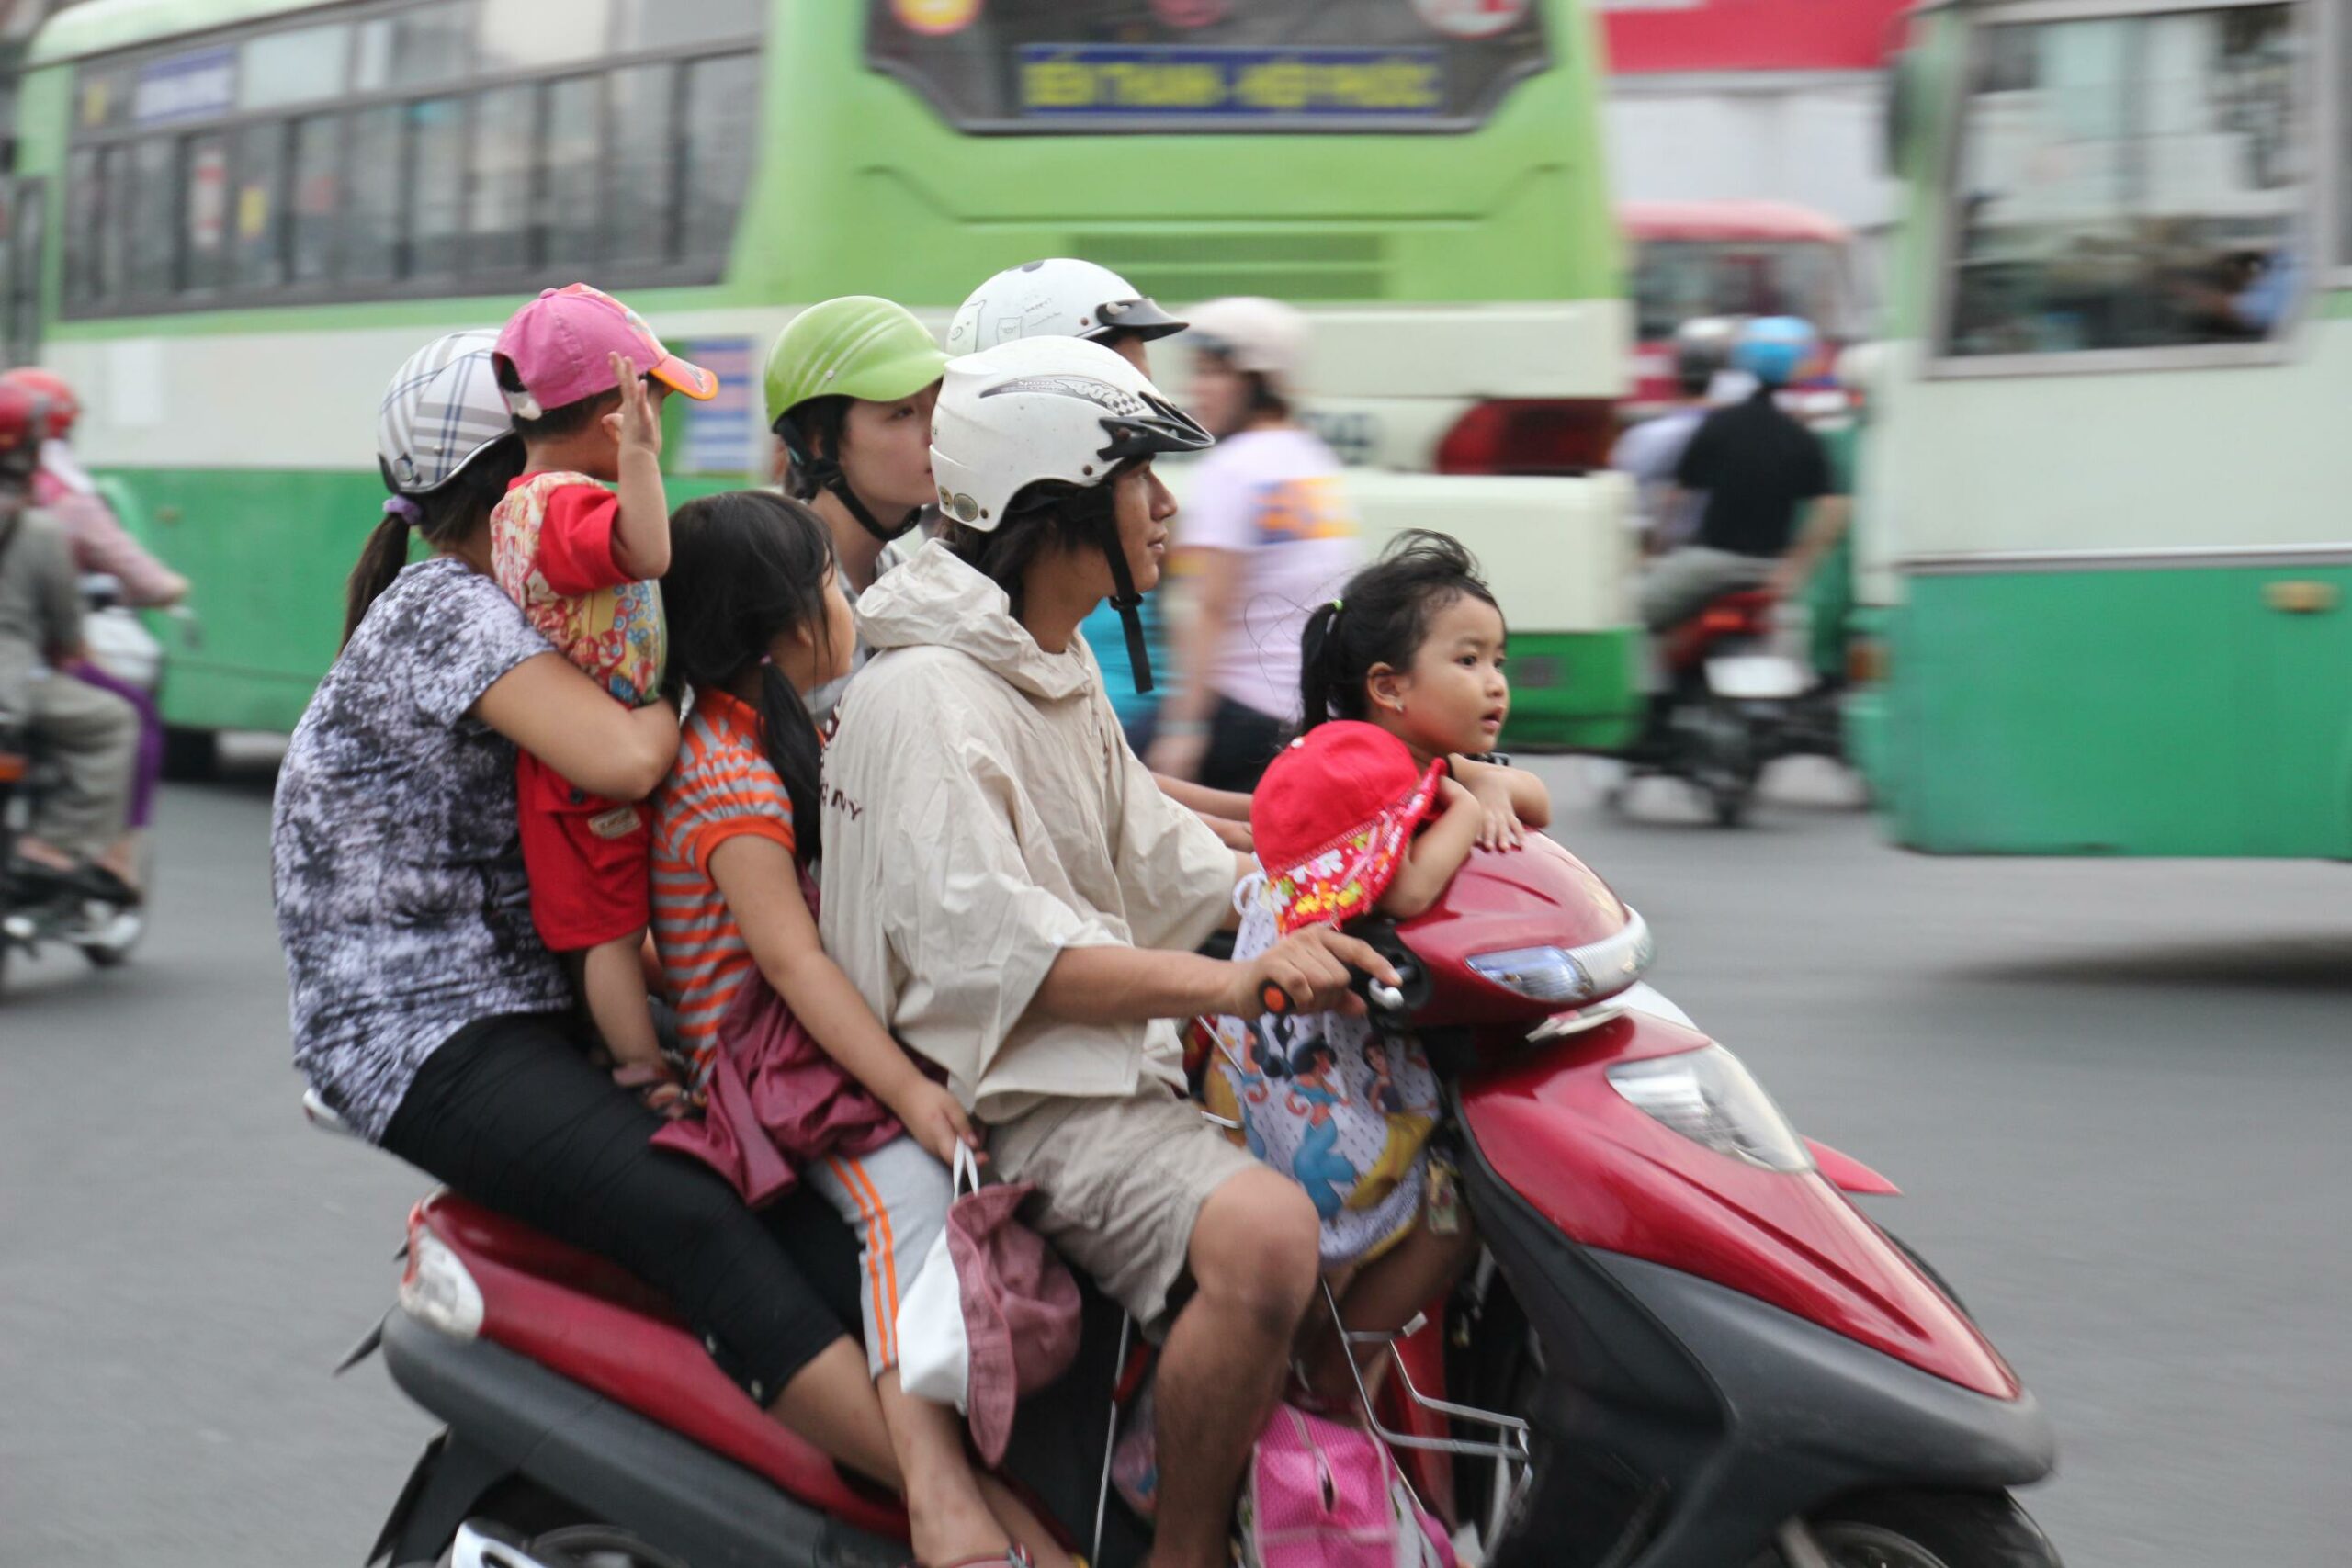 A five-person Vietnamese family squeezes on to a motorcycle in Ho Chi Minh City, Vietnam.